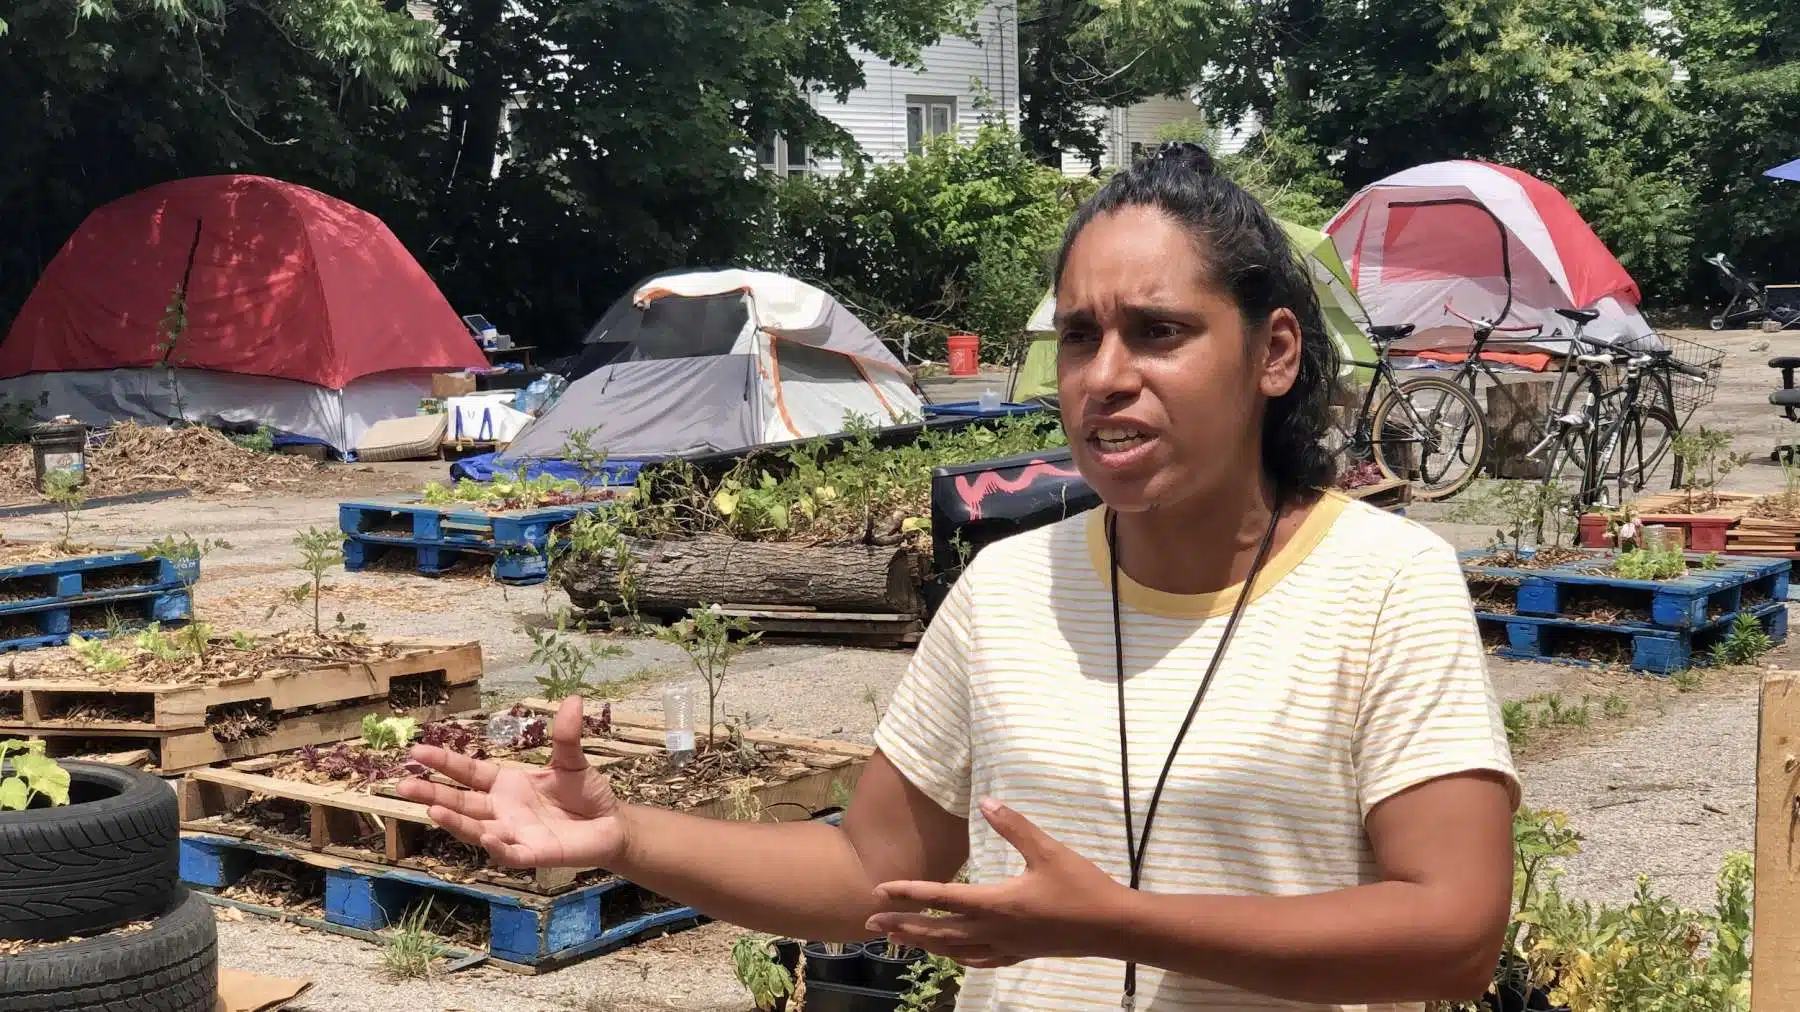 Given 48 hours to vacate, unhoused encampment in PVD holds press conference